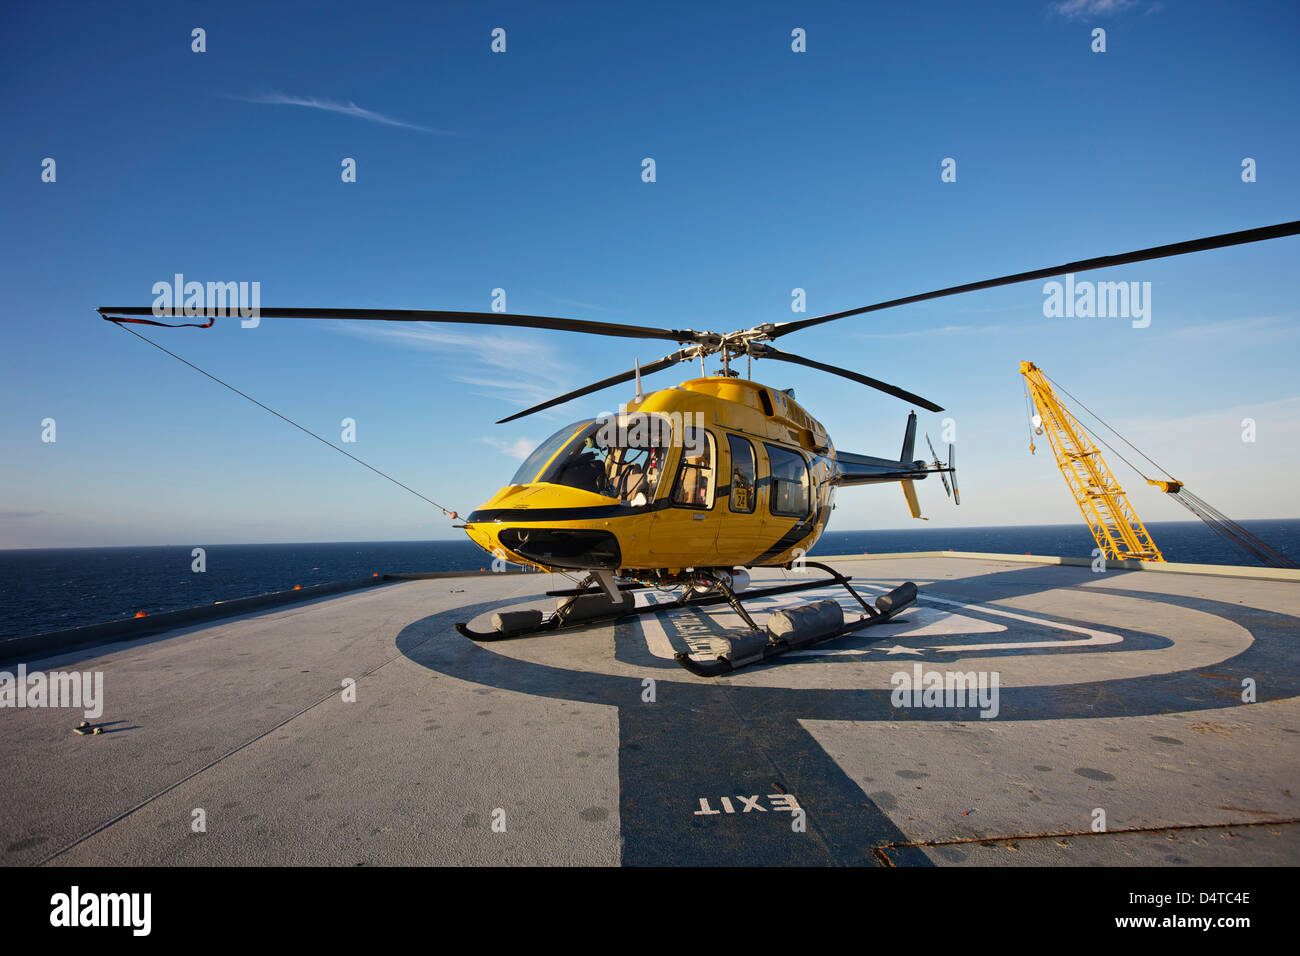 A Bell 407 utility helicopter on the helipad of an oil rig. Stock Photo